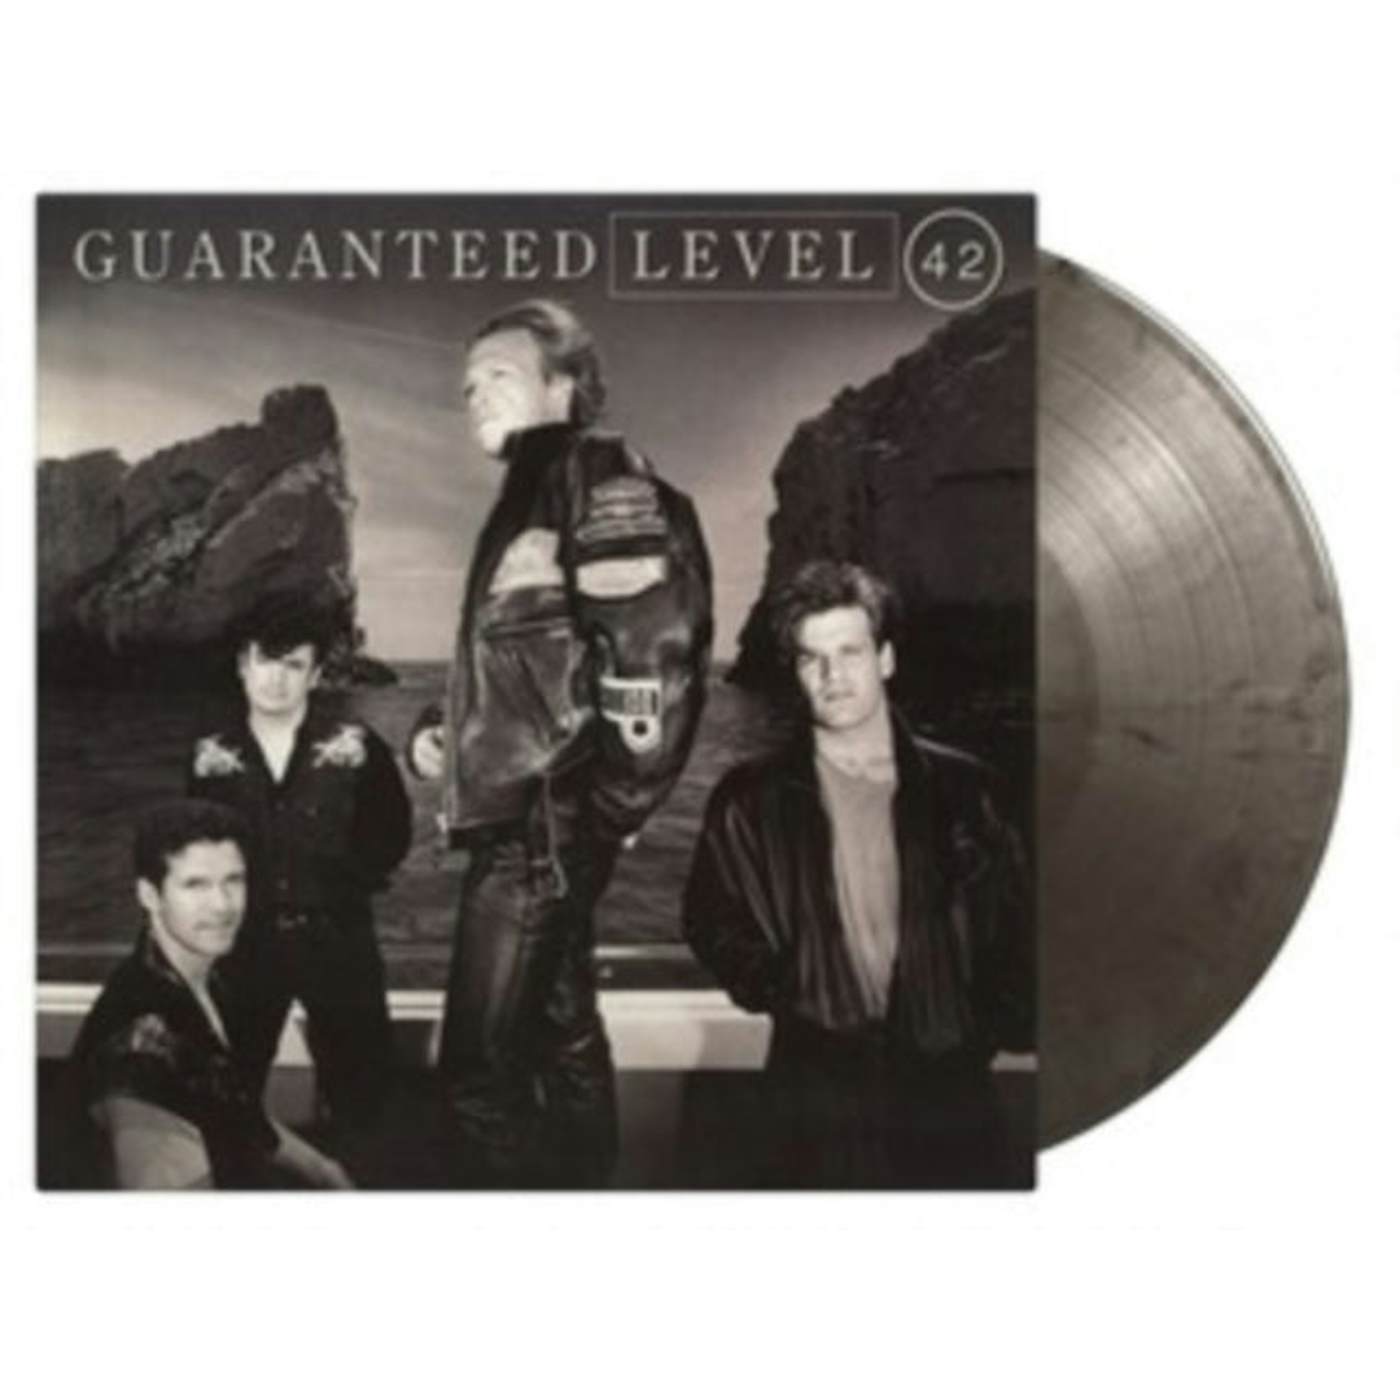 Level 42 LP Vinyl Record  Guaranteed (Expanded Edition) (Coloured Vinyl)